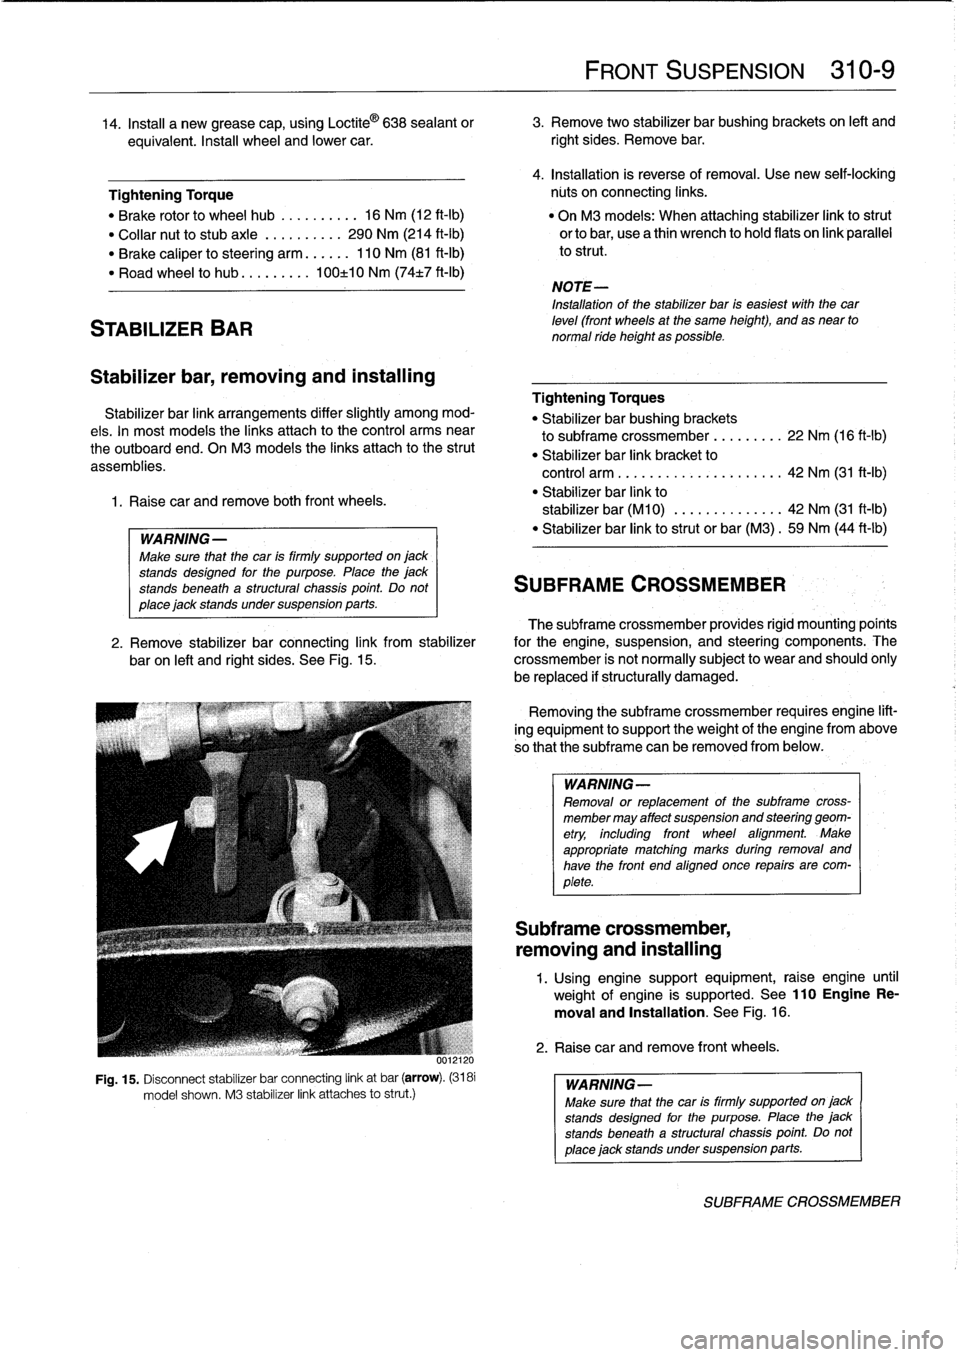 BMW 318i 1997 E36 Workshop Manual 
STABILIZER
BAR

Stabilizer
bar,
removing
and
installing

Stabilizer
bar
link
arrangements
differ
slightly
among
mod-

els
.
In
most
models
the
links
attach
lo
the
control
arms
near

the
outboard
end
